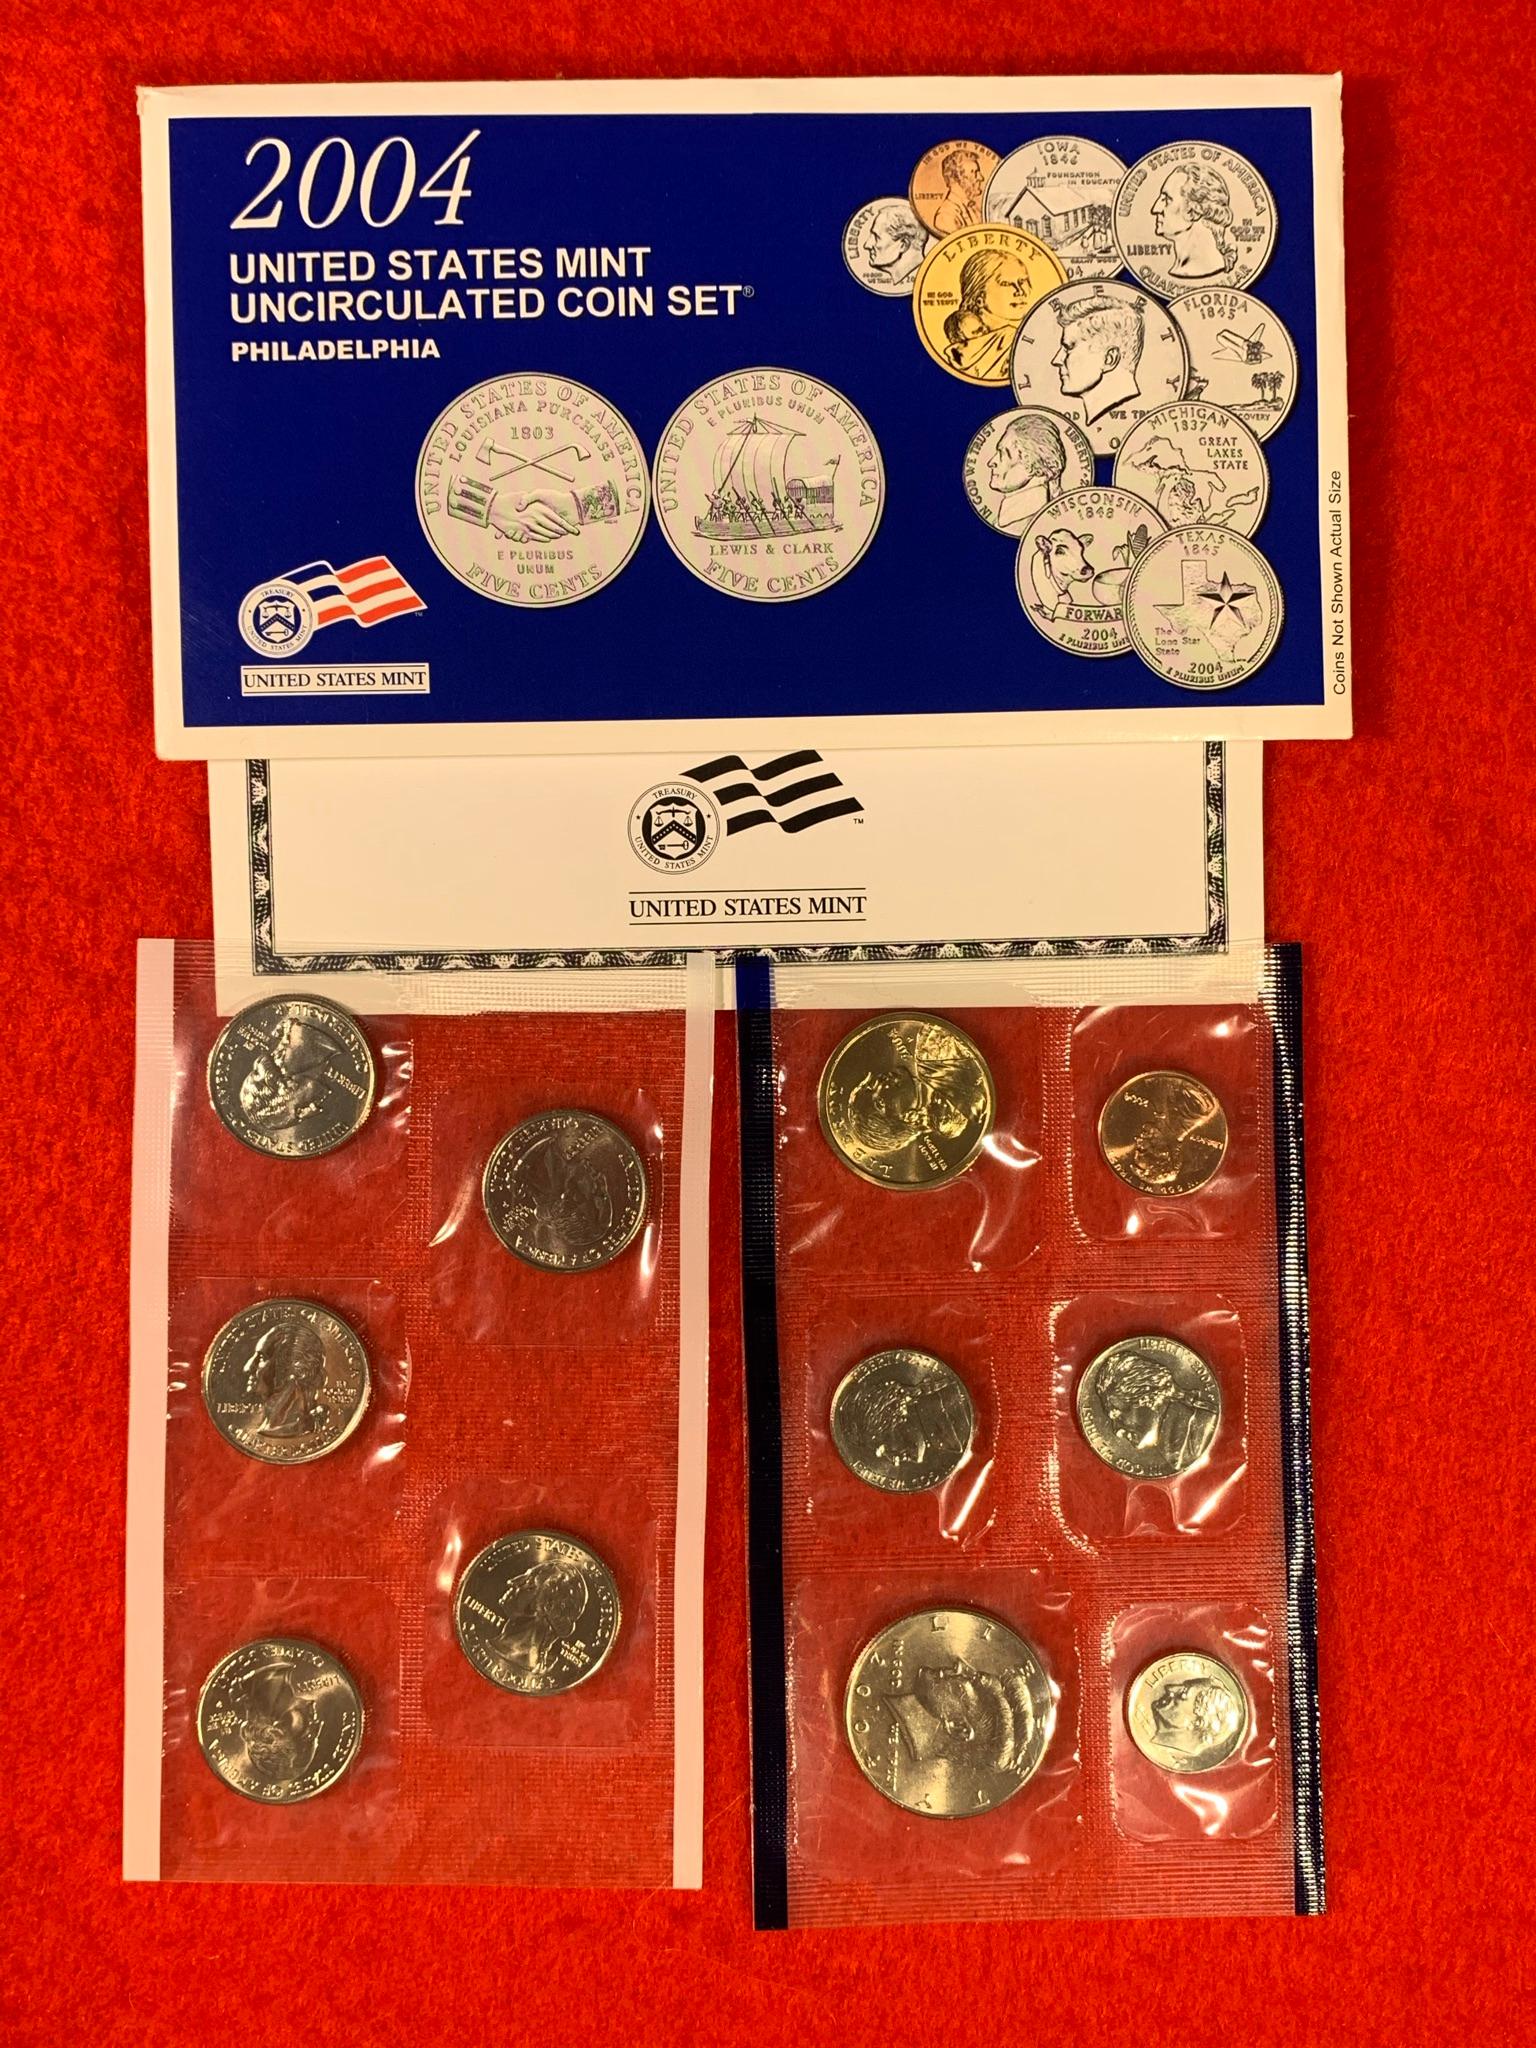 4 Uncirculated Coin Sets - 2002, (2) 2003 coin packets & 2004